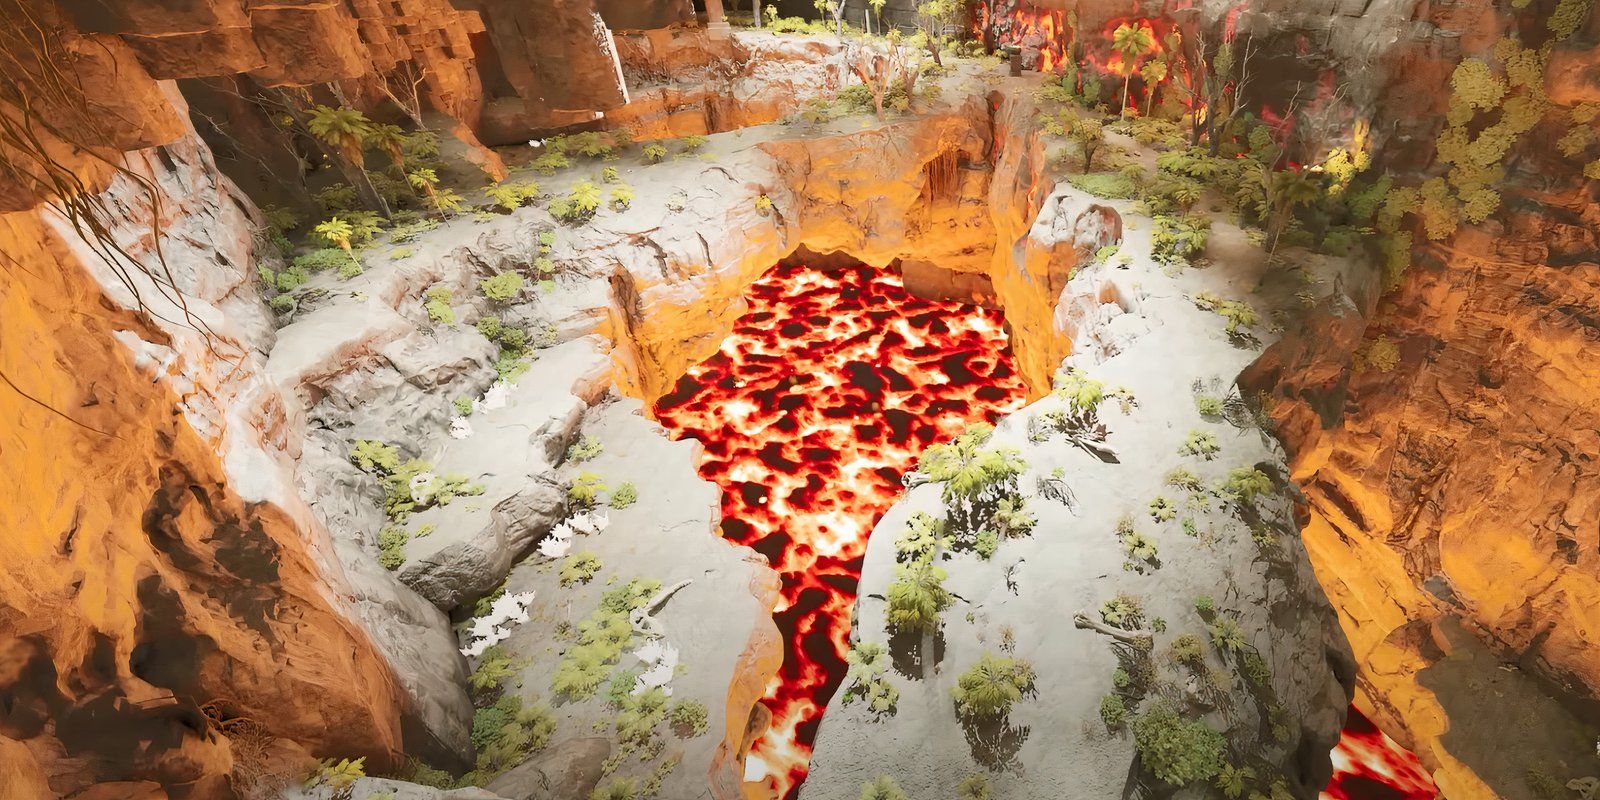 The underground cave system in Ark Survival Ascended.